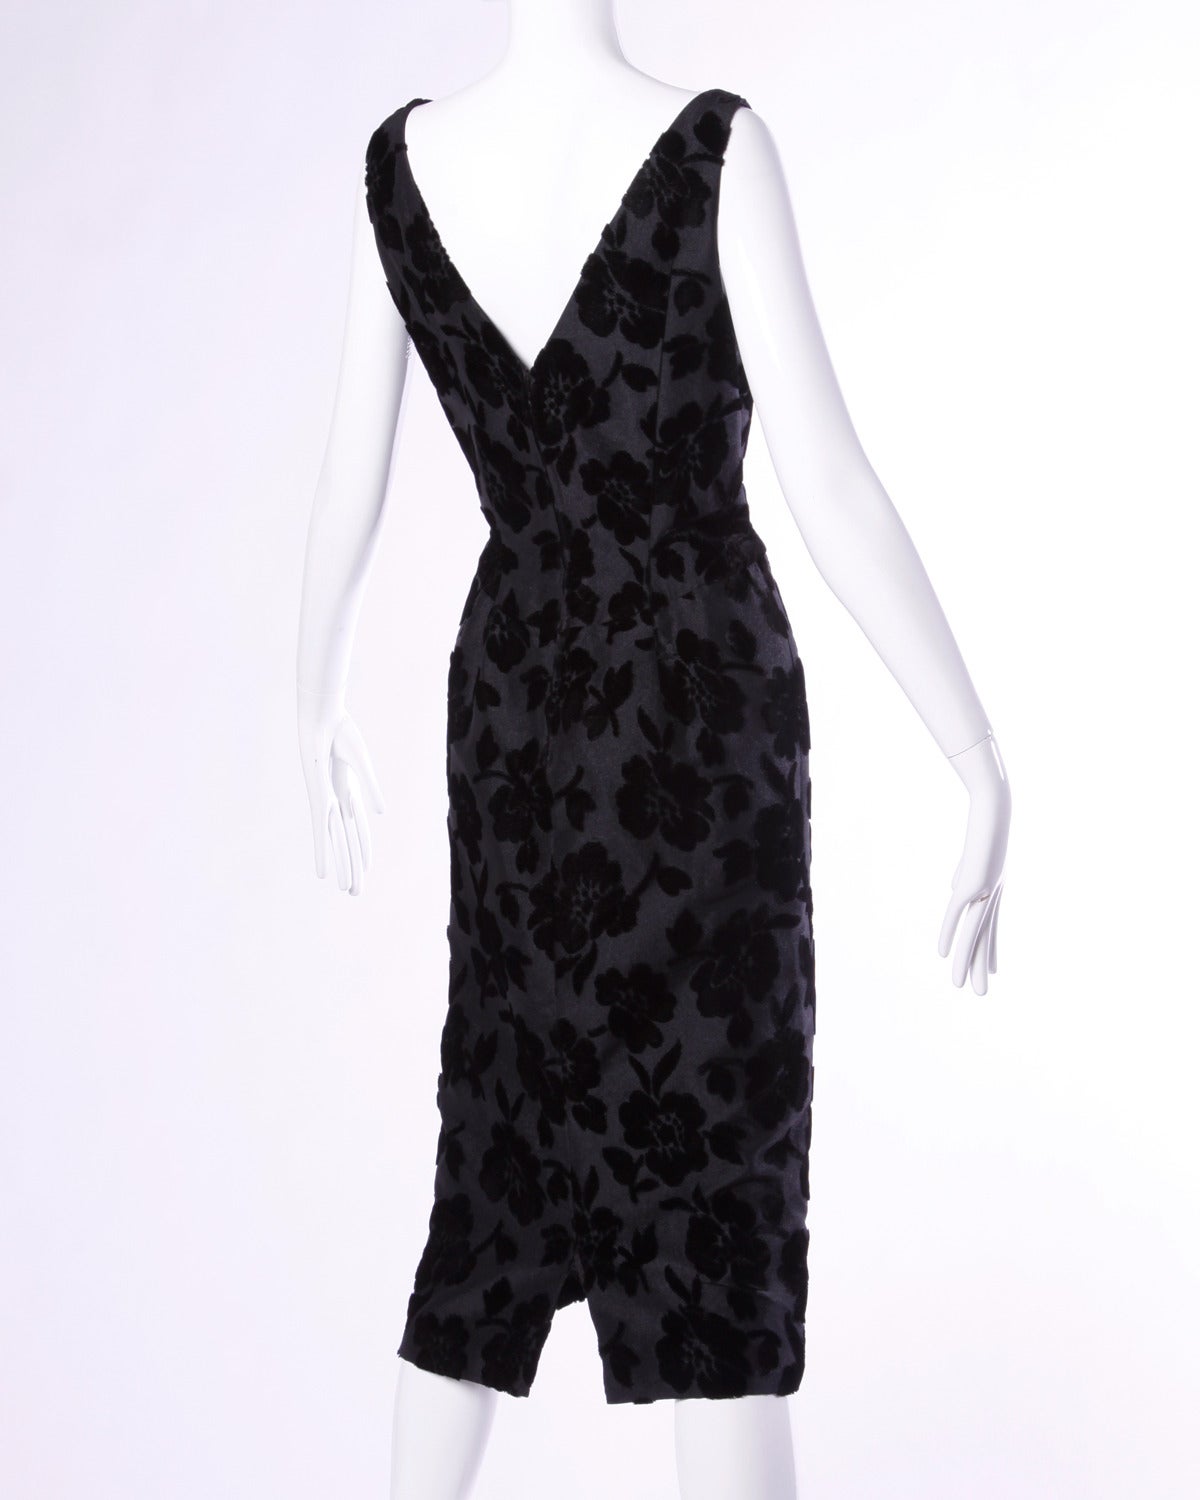 Extremely rare early Oleg Cassini vintage couture cocktail dress in burnout silk velvet. Hand stitched couture construction and hourglass silhouette. This dress is extremely well made and nothing like his later ready to wear pieces.

Details: